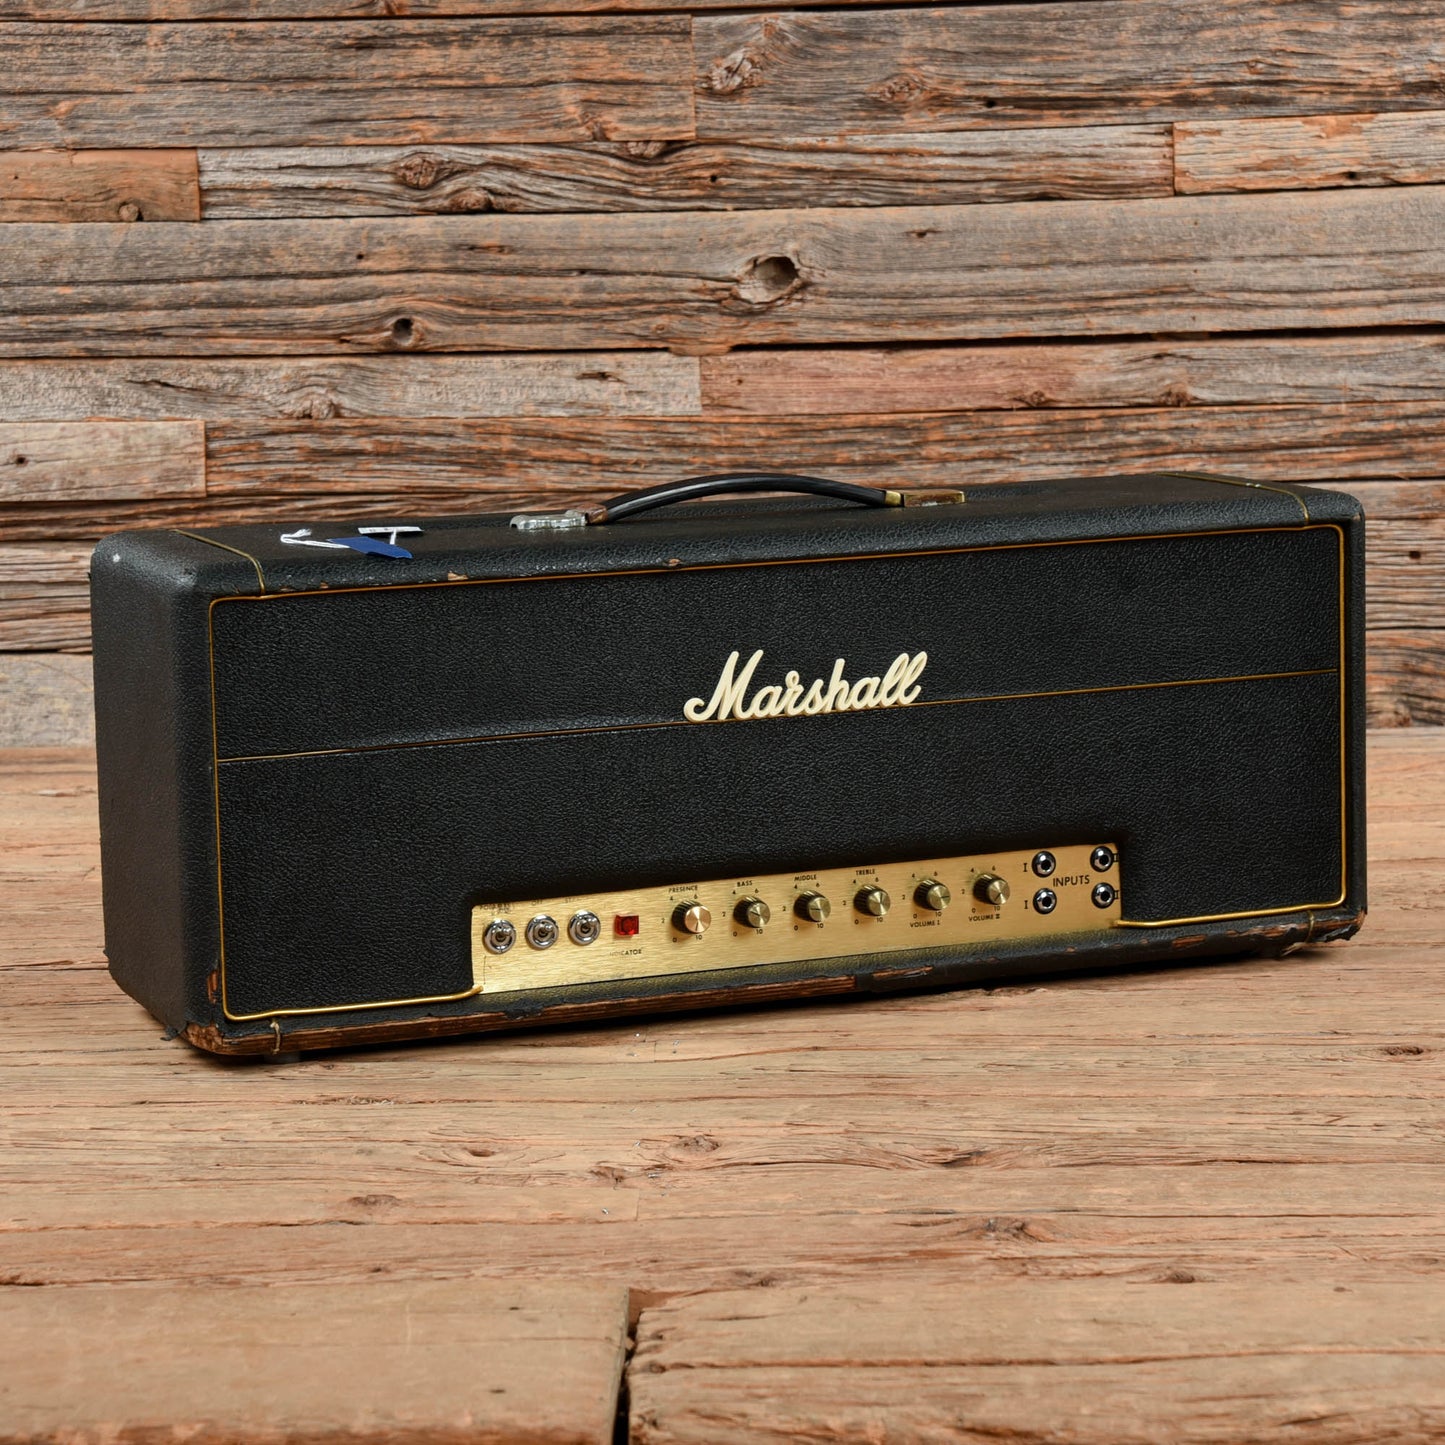 Marshall 1992 Super Bass Back 1971 Amps / Guitar Cabinets